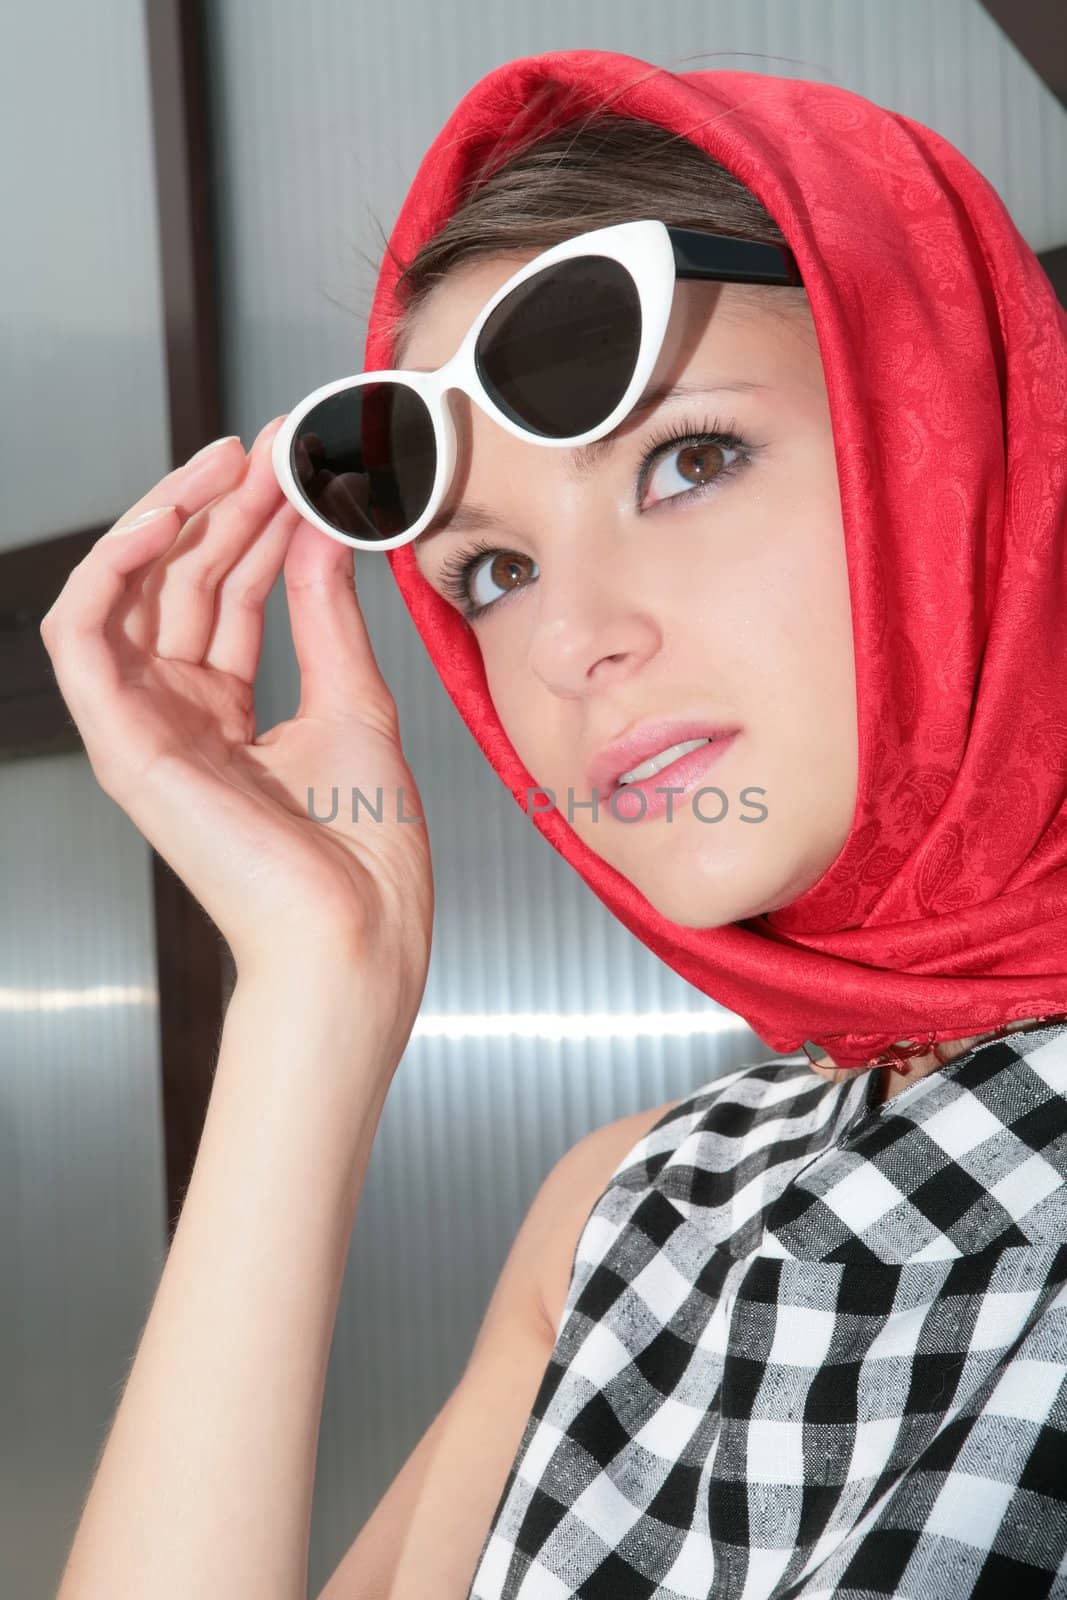 beautiful girl in plaid dress with red kerchief and stylish sunglasses